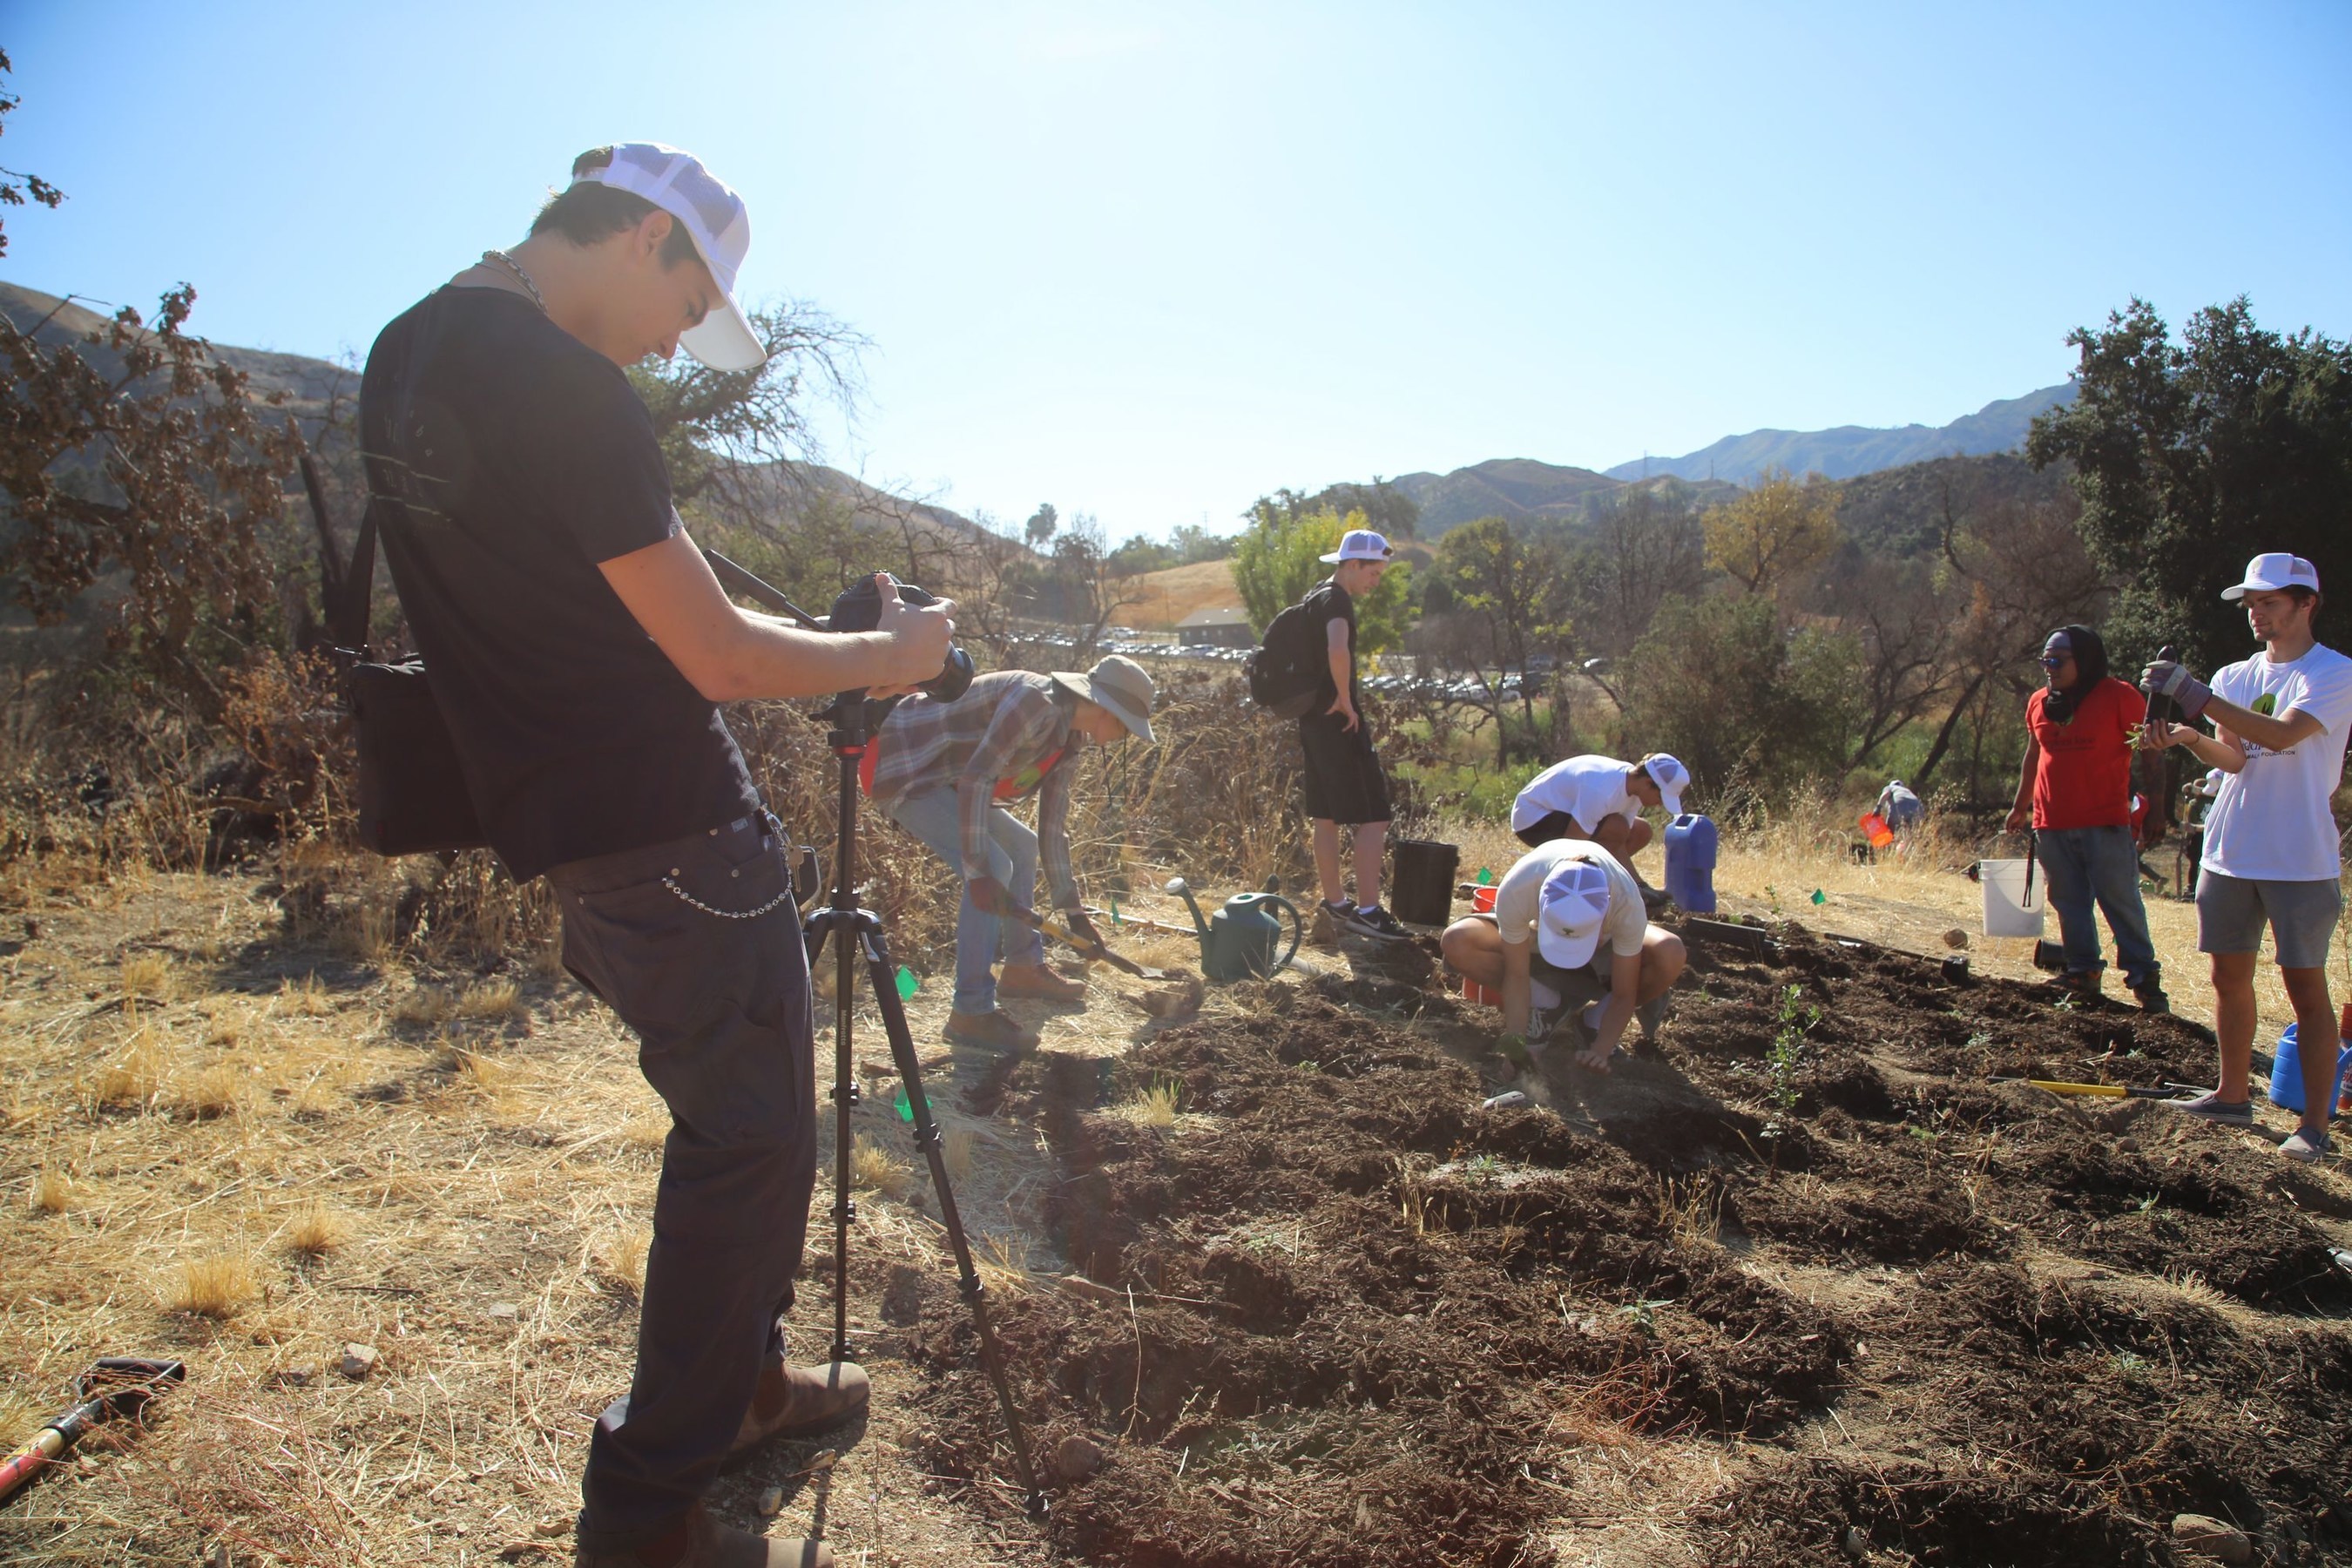 Clarins X Malibu Foundation Hosted Re-Plant Love, The Largest Planting Day In The Santa Monica Mountains Documented By Malibu Native Filmmaker, Paris Brosnan